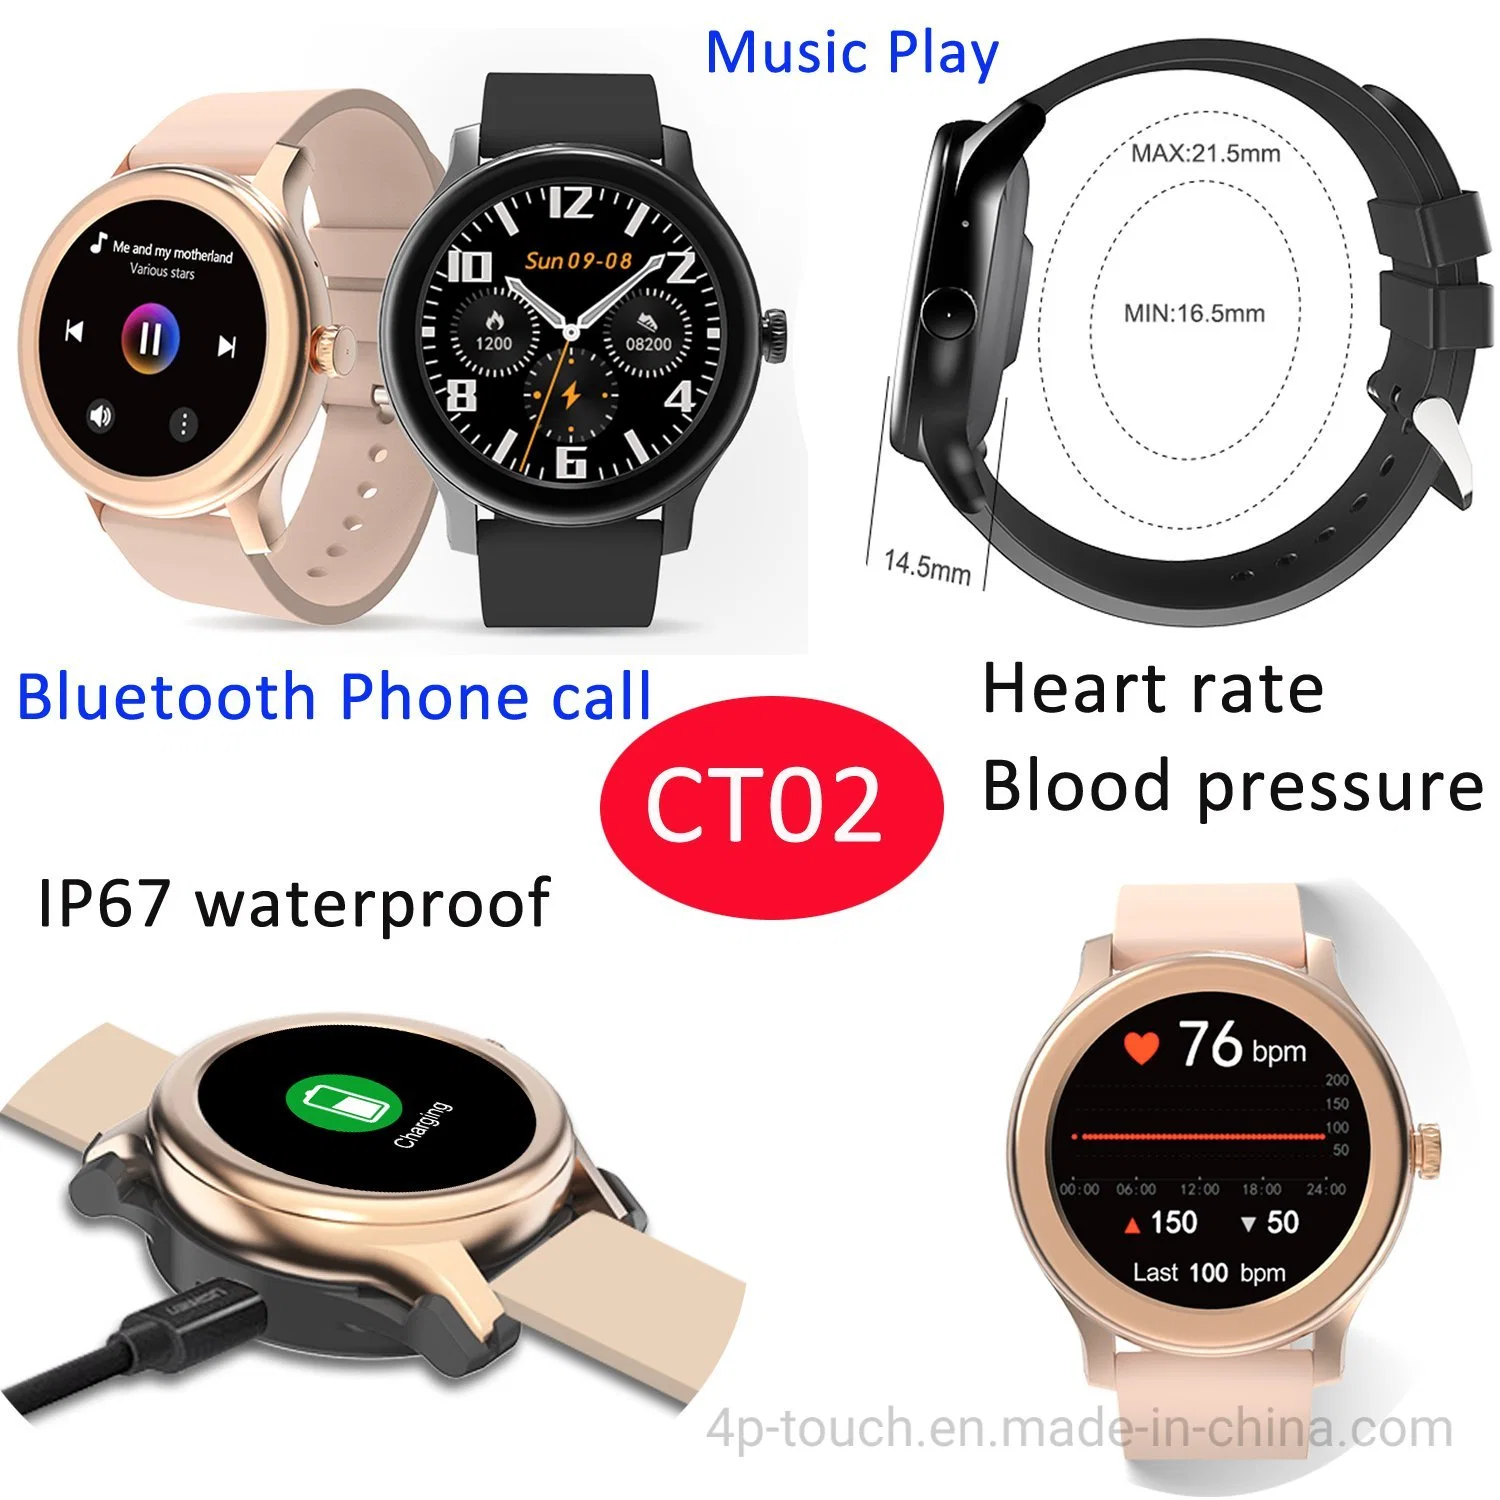 Elegant Fashion Lady Smart Watch Support Music Play Bluetooth Phone Call CT02